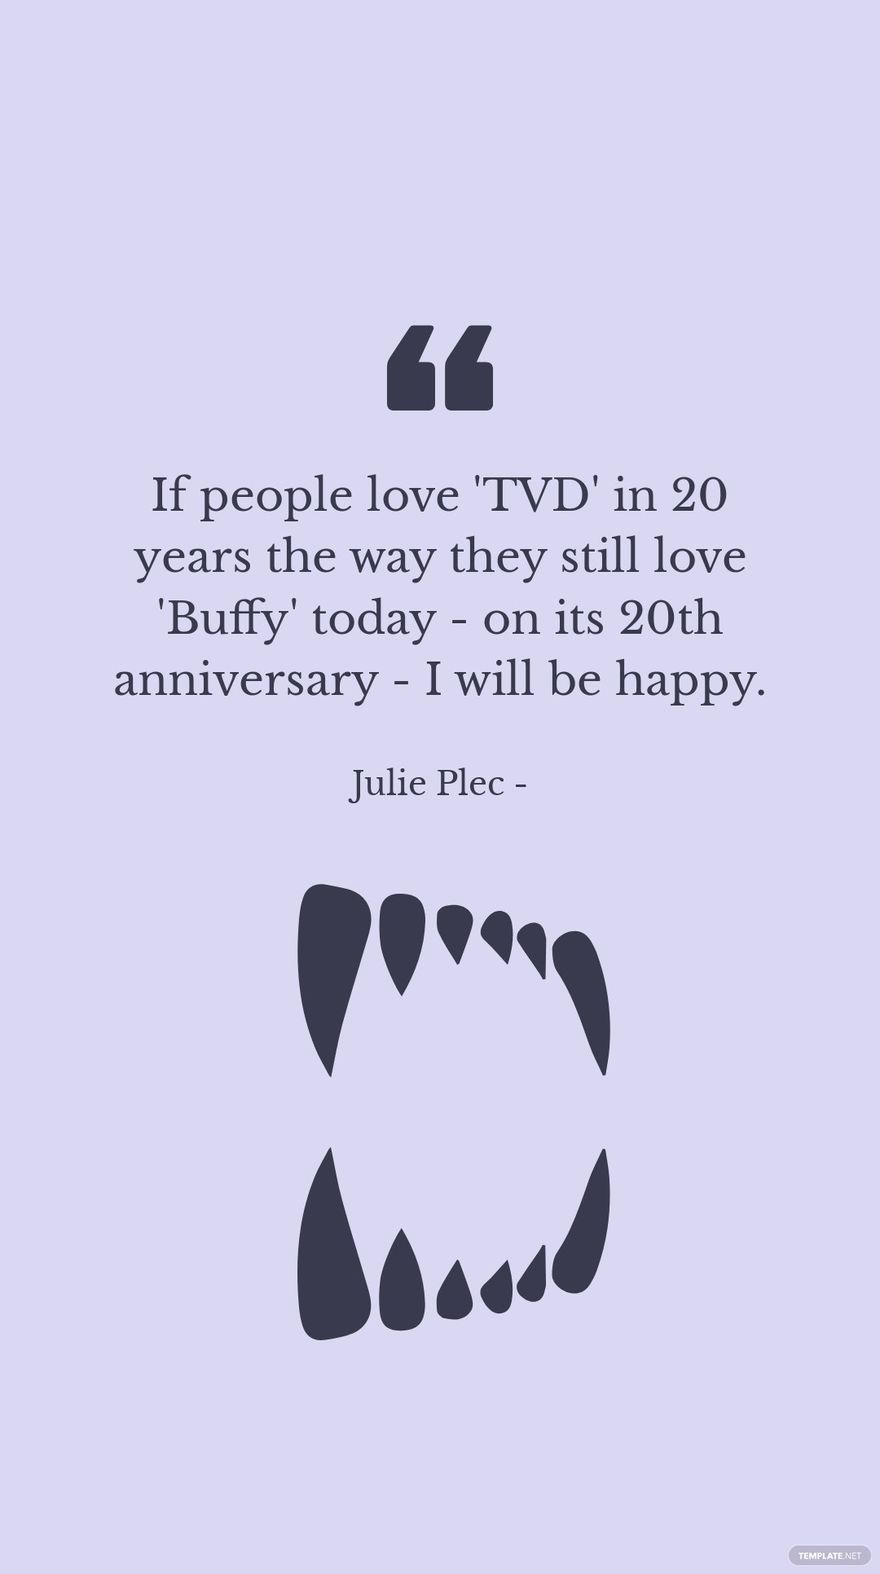 Julie Plec - If people love 'TVD' in 20 years the way they still love 'Buffy' today - on its 20th anniversary - I will be happy. in JPG